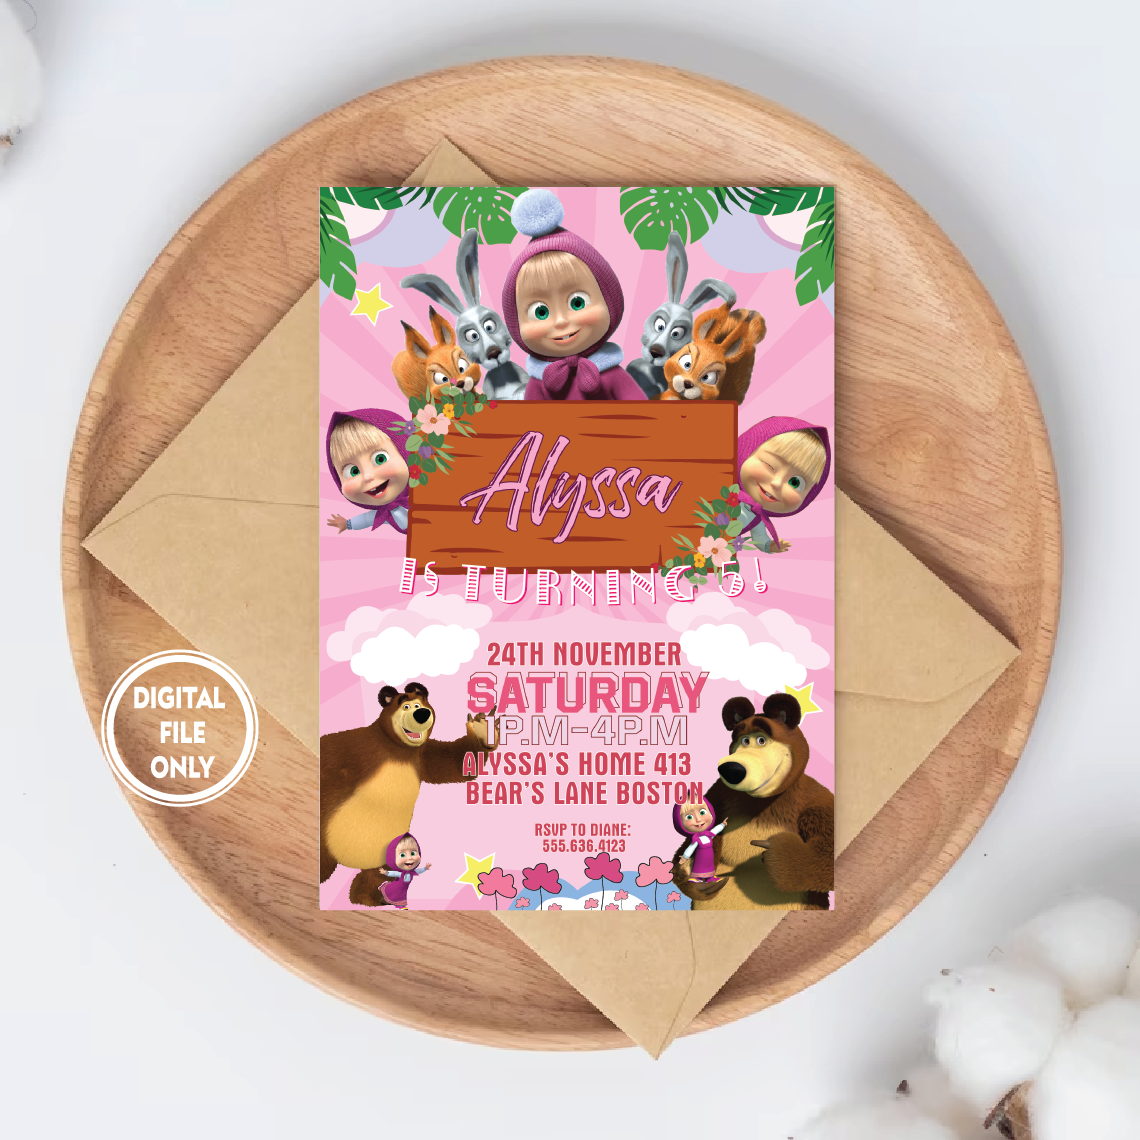 Personalized File Masha and The Bear Invitation for Girls Birthday Party Invitation for Masha Birthday Bear Invite Digital Masha and Bear PNG File Only